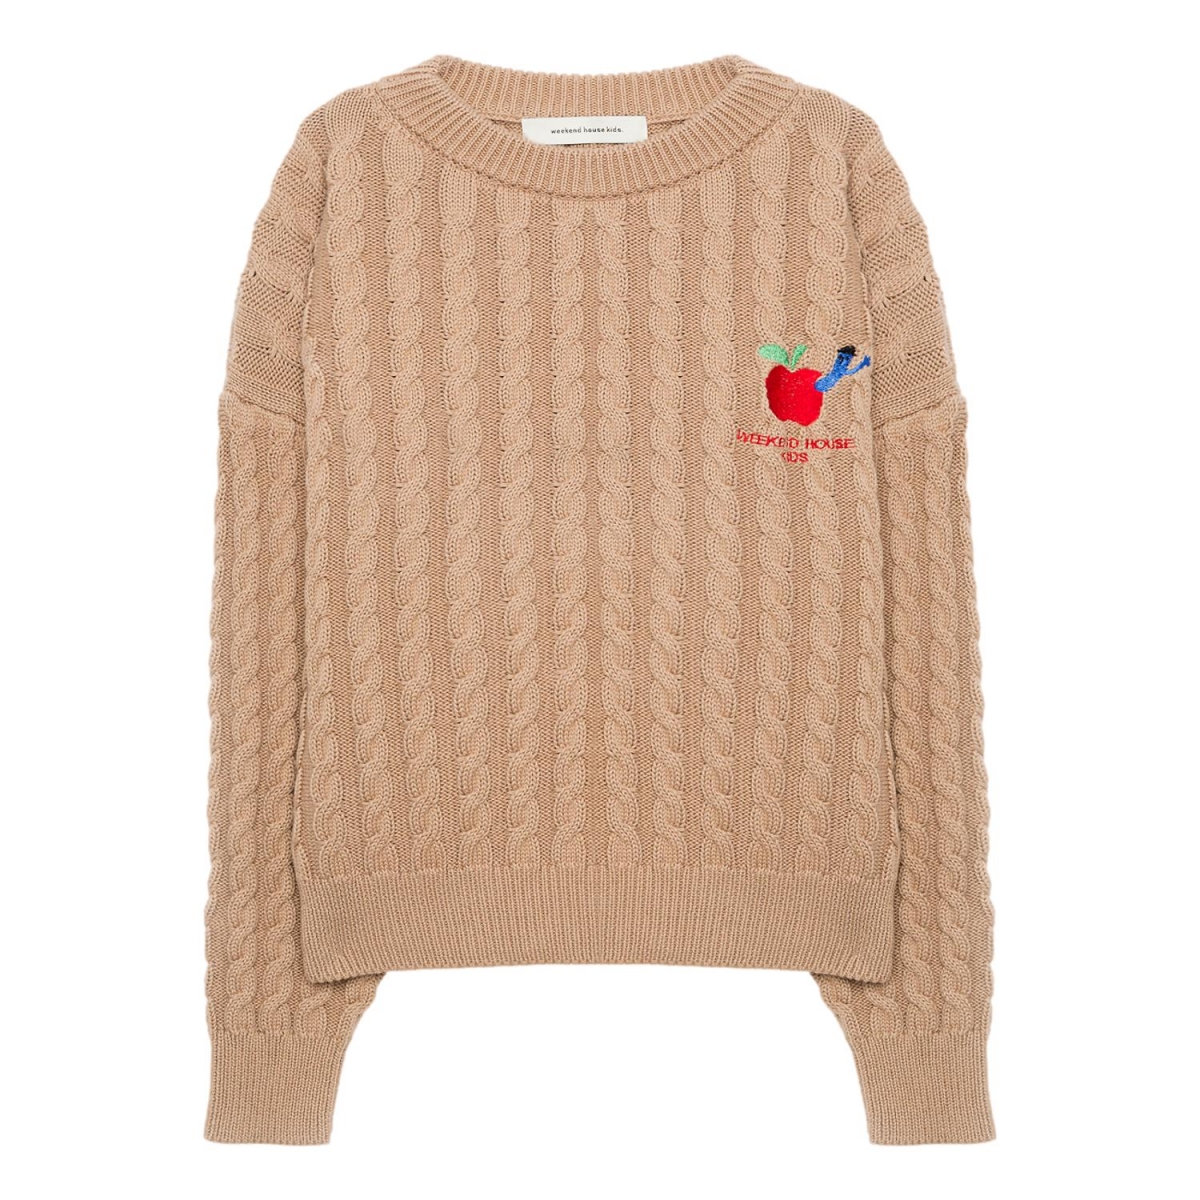 Weekend House Kids Apple Cable knit sweater brown 311 